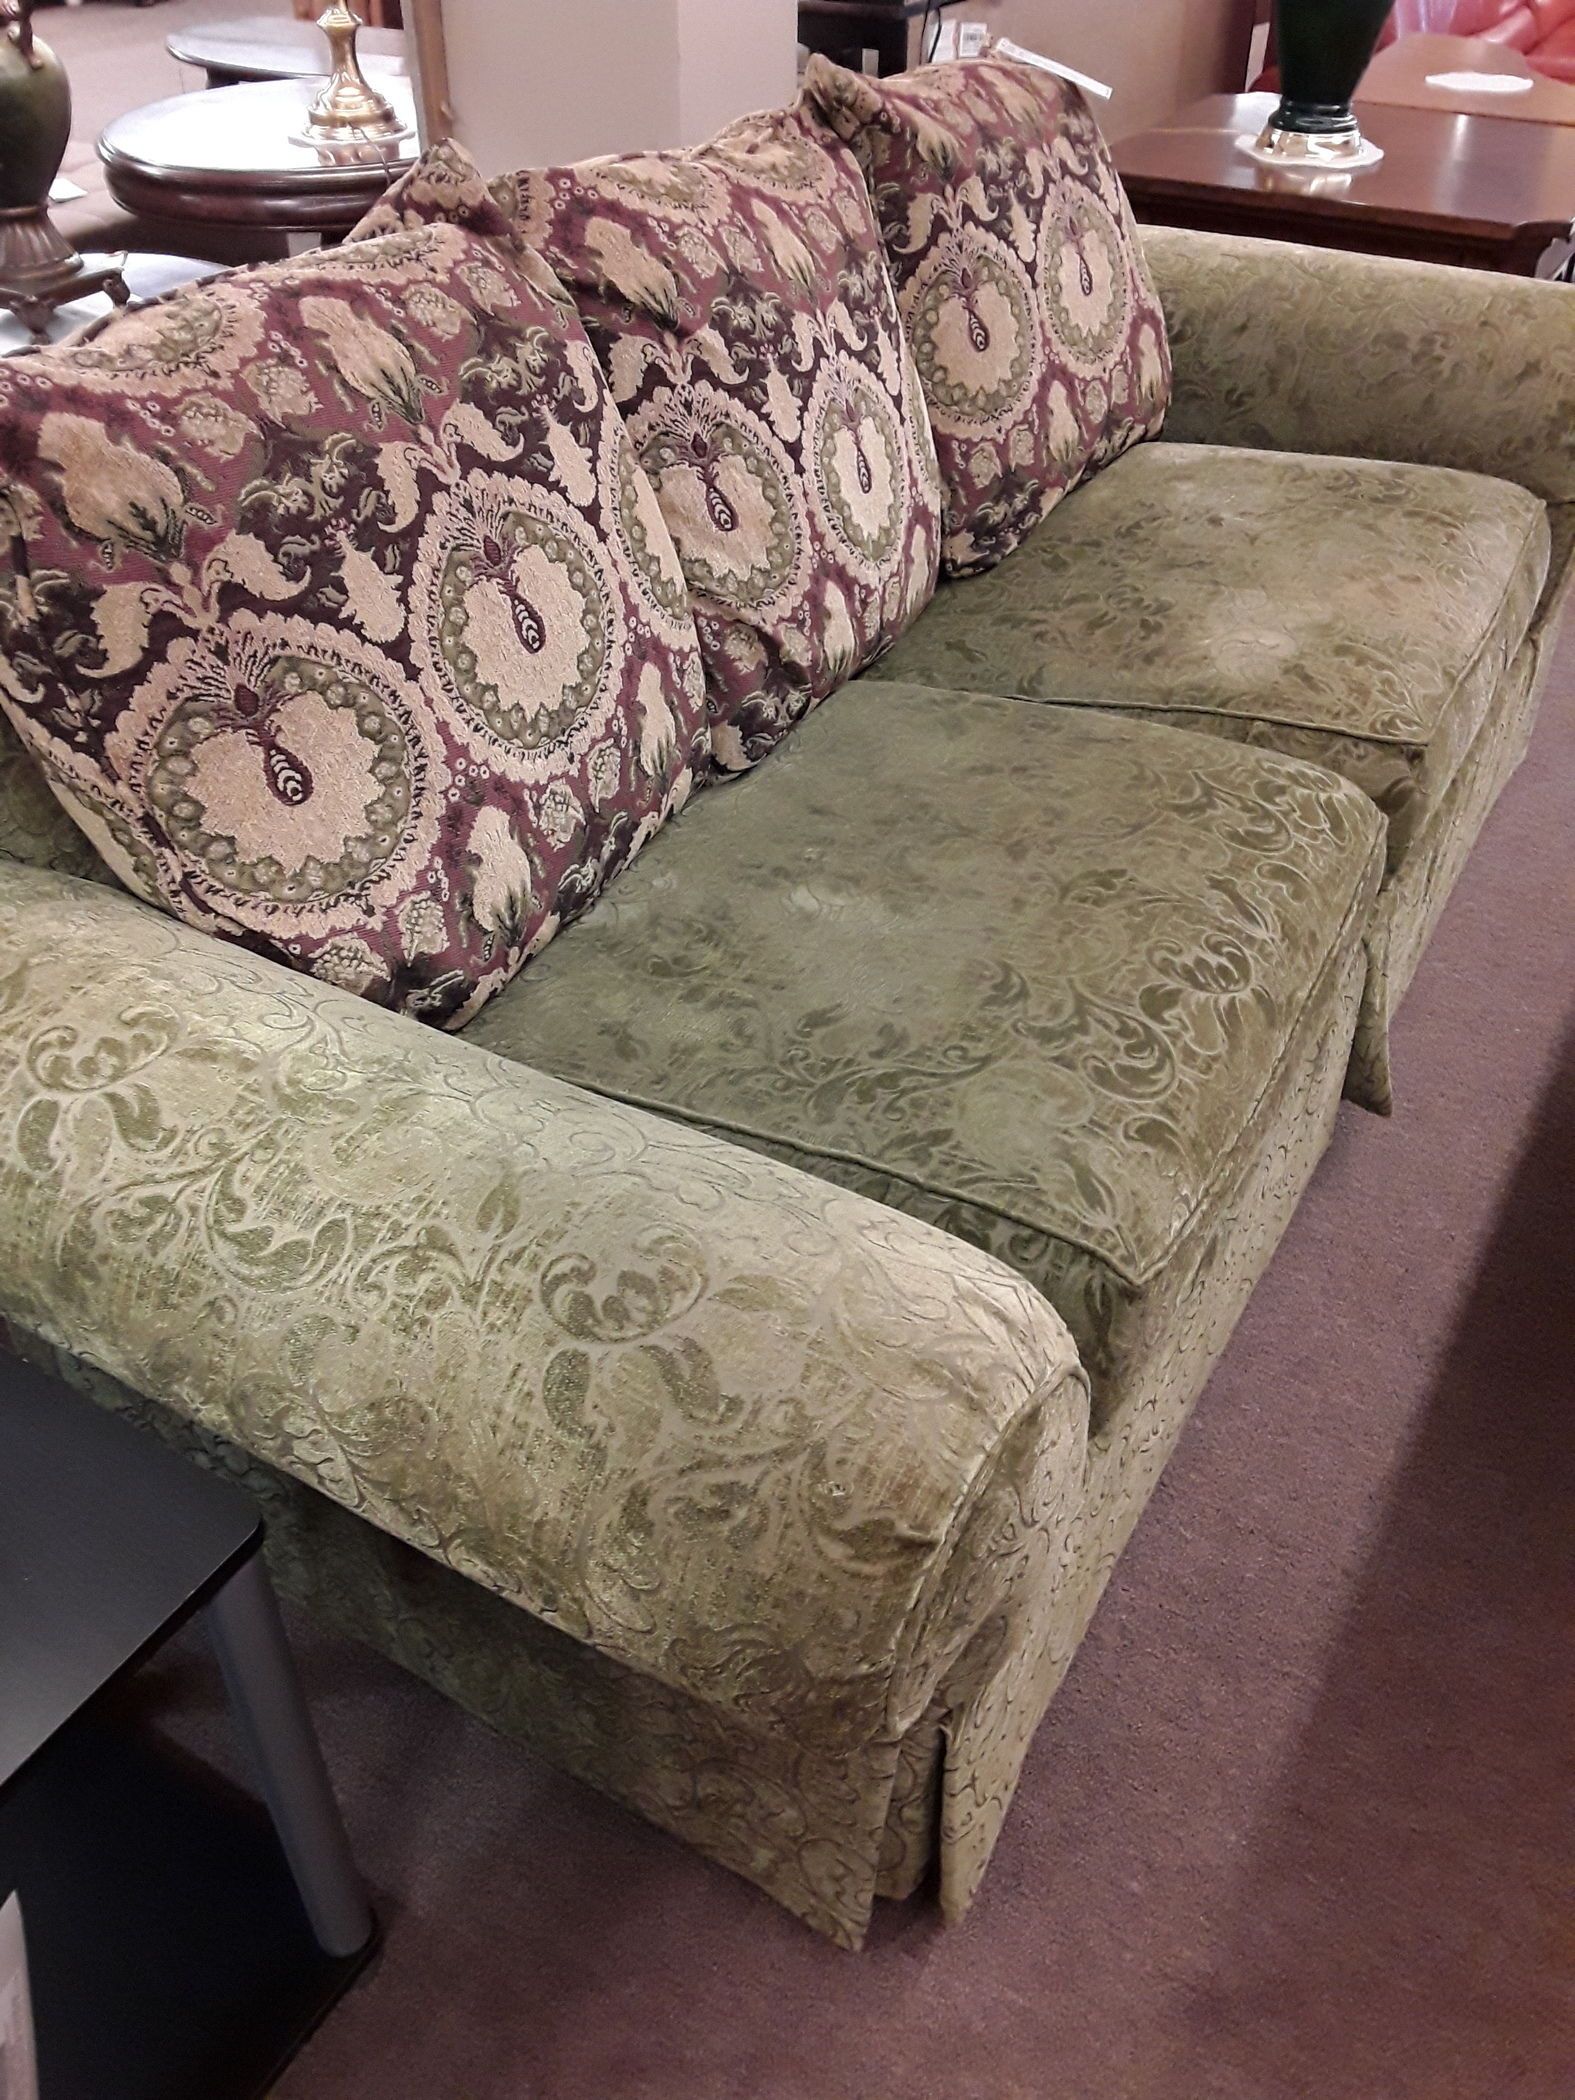 Thomasville Pillow Back Sofa | Delmarva Furniture Consignment Intended For Sofas With Pillowback Wood Bases (Gallery 2 of 20)